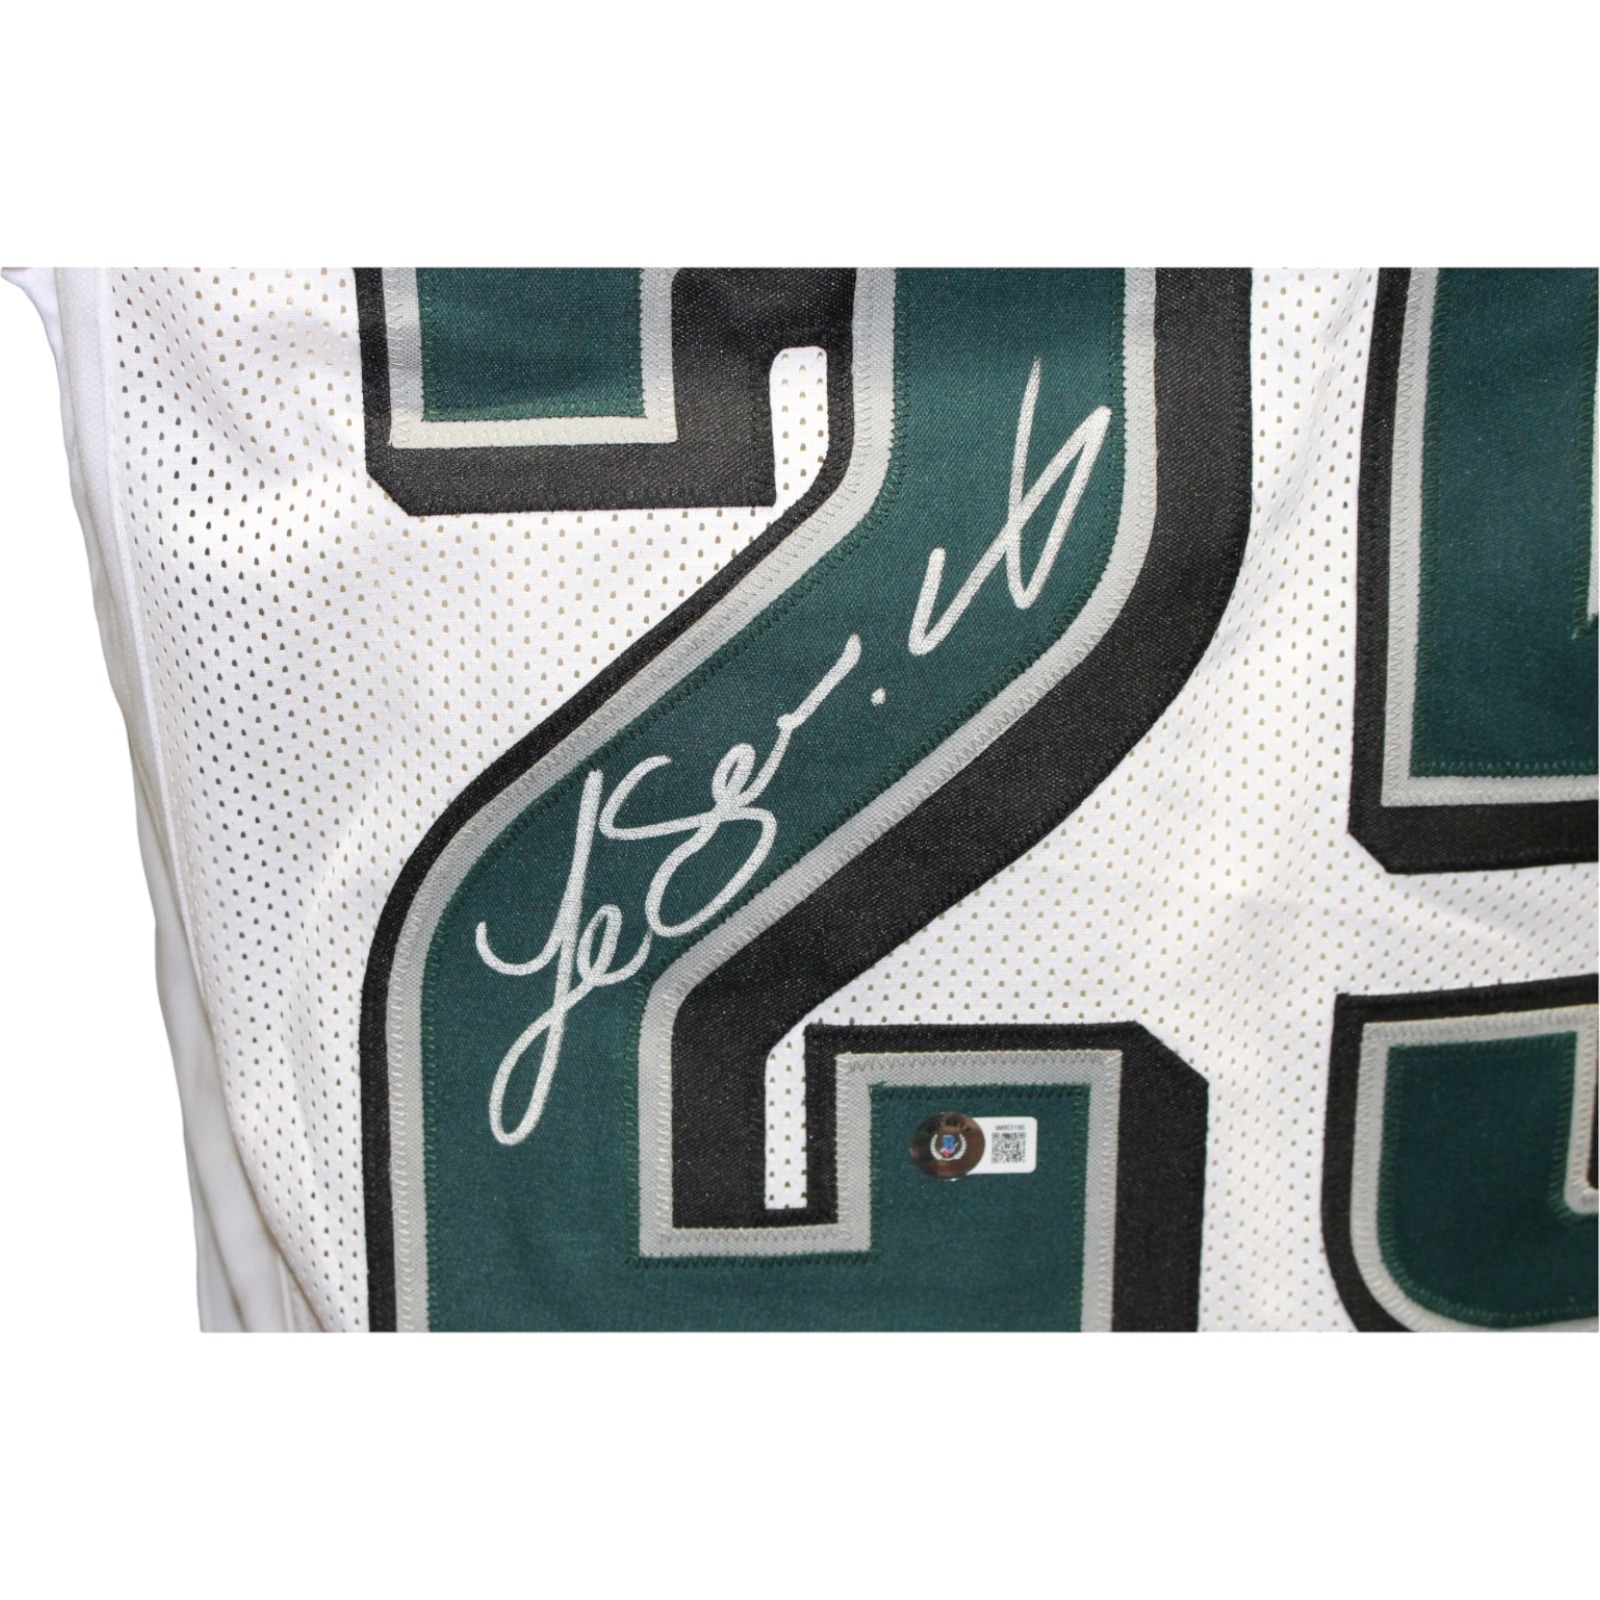 Lesean McCoy Autographed/Signed Pro Style White Jersey Beckett